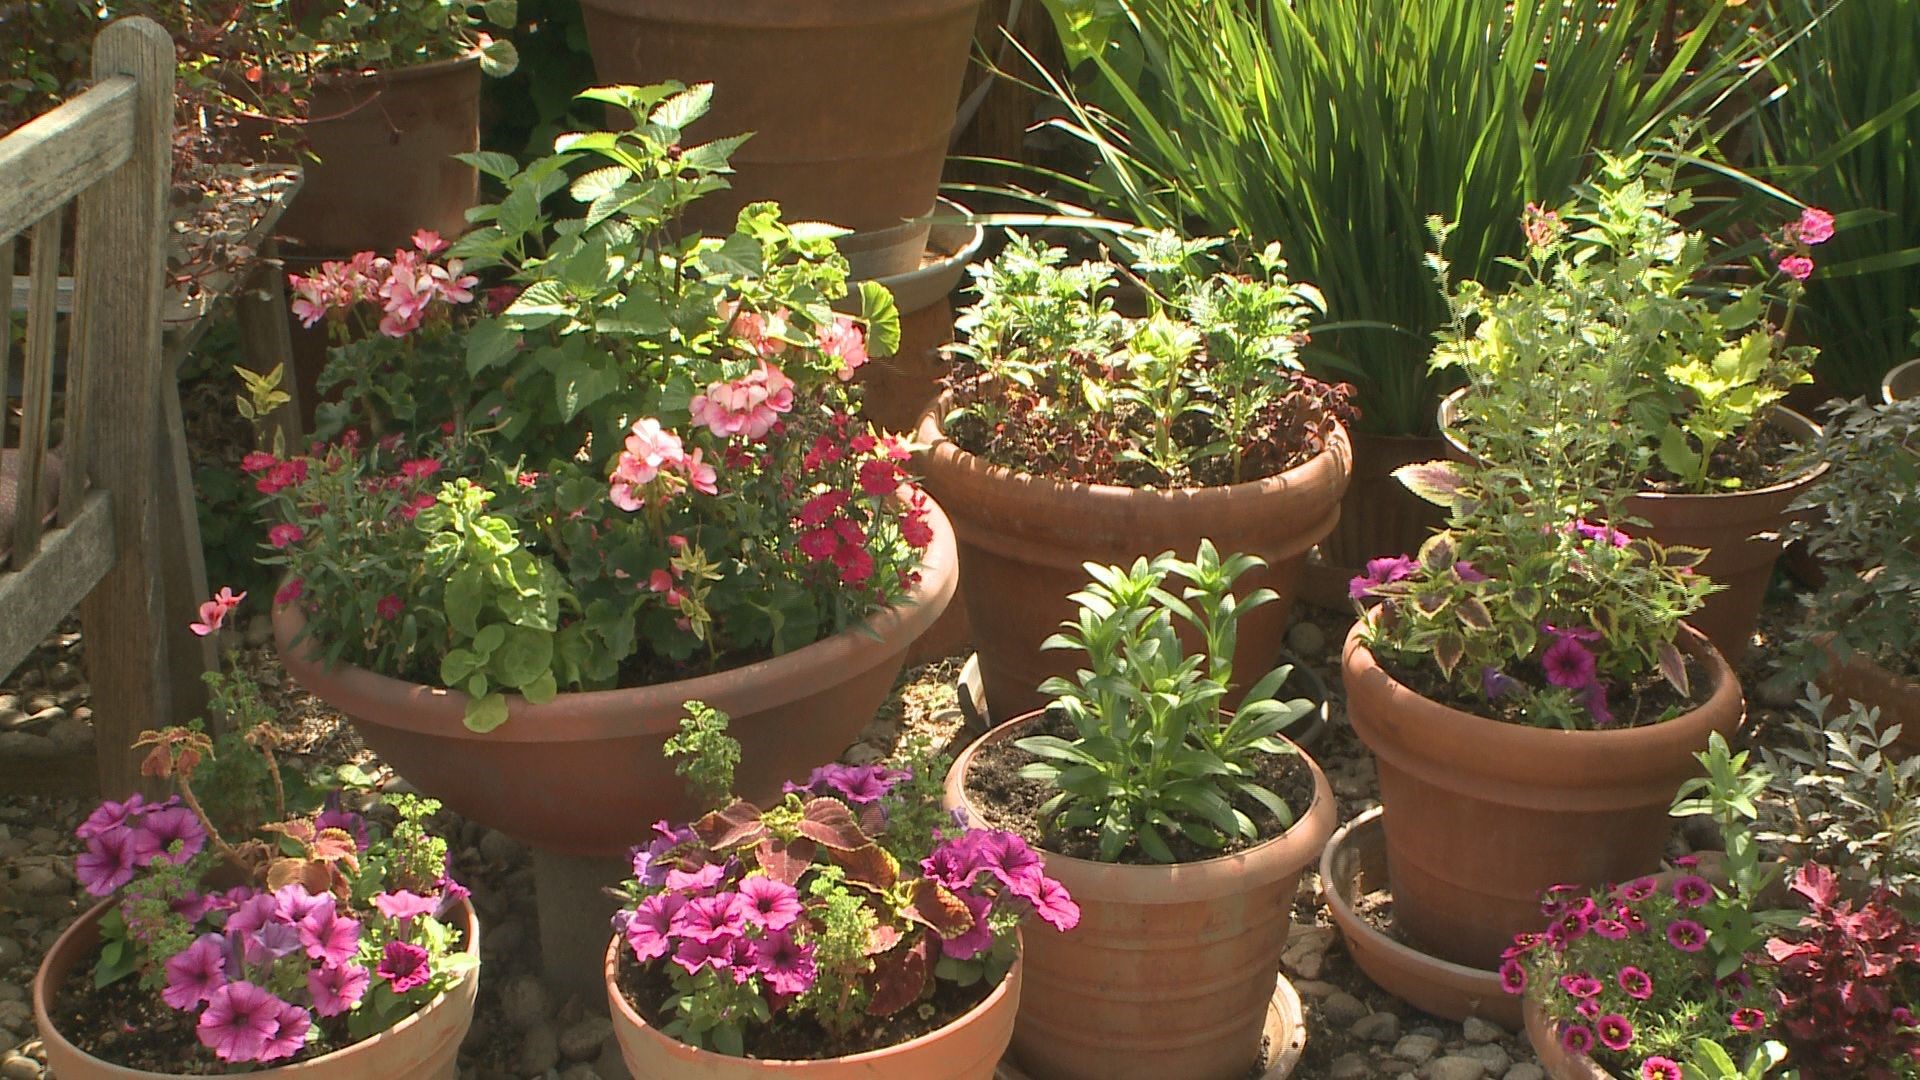 You can grow almost anything in a container. Here are some tips for picking the right pots.